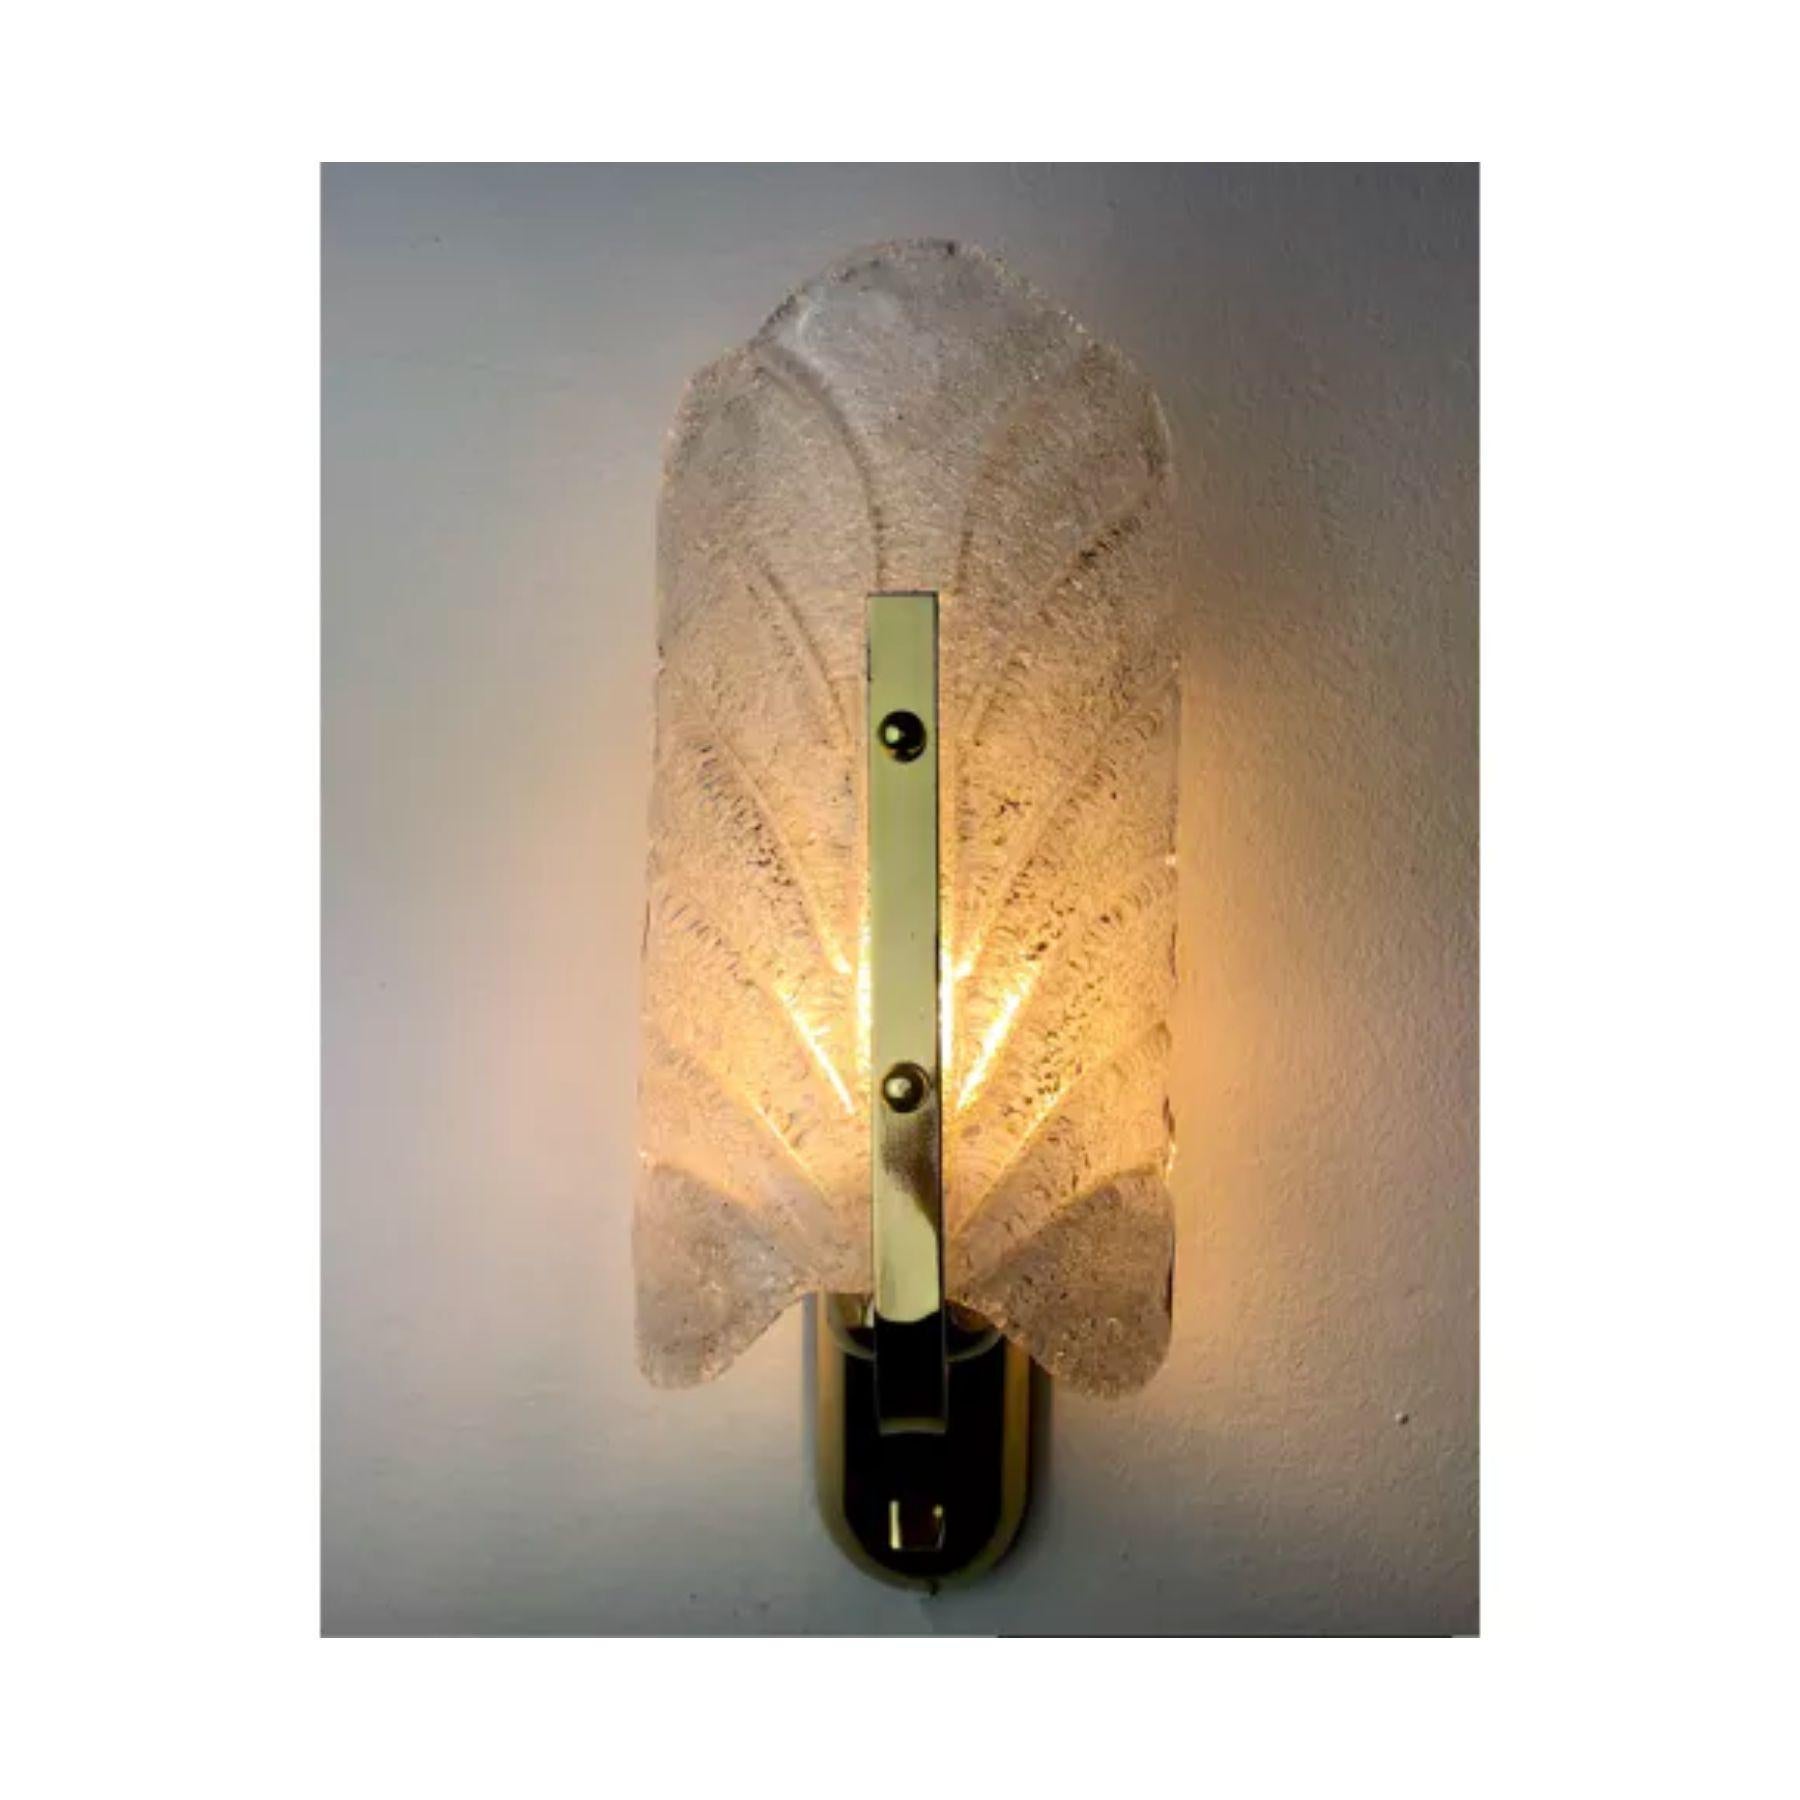 Very nice little wall lamp by carl fagerlund for lyfa from the 70s. Structure in gilded metal and leaf-shaped frosted glass. The diffused light is soft and harmonious, perfect for illuminating your interior. Mark of time consistent with the age of